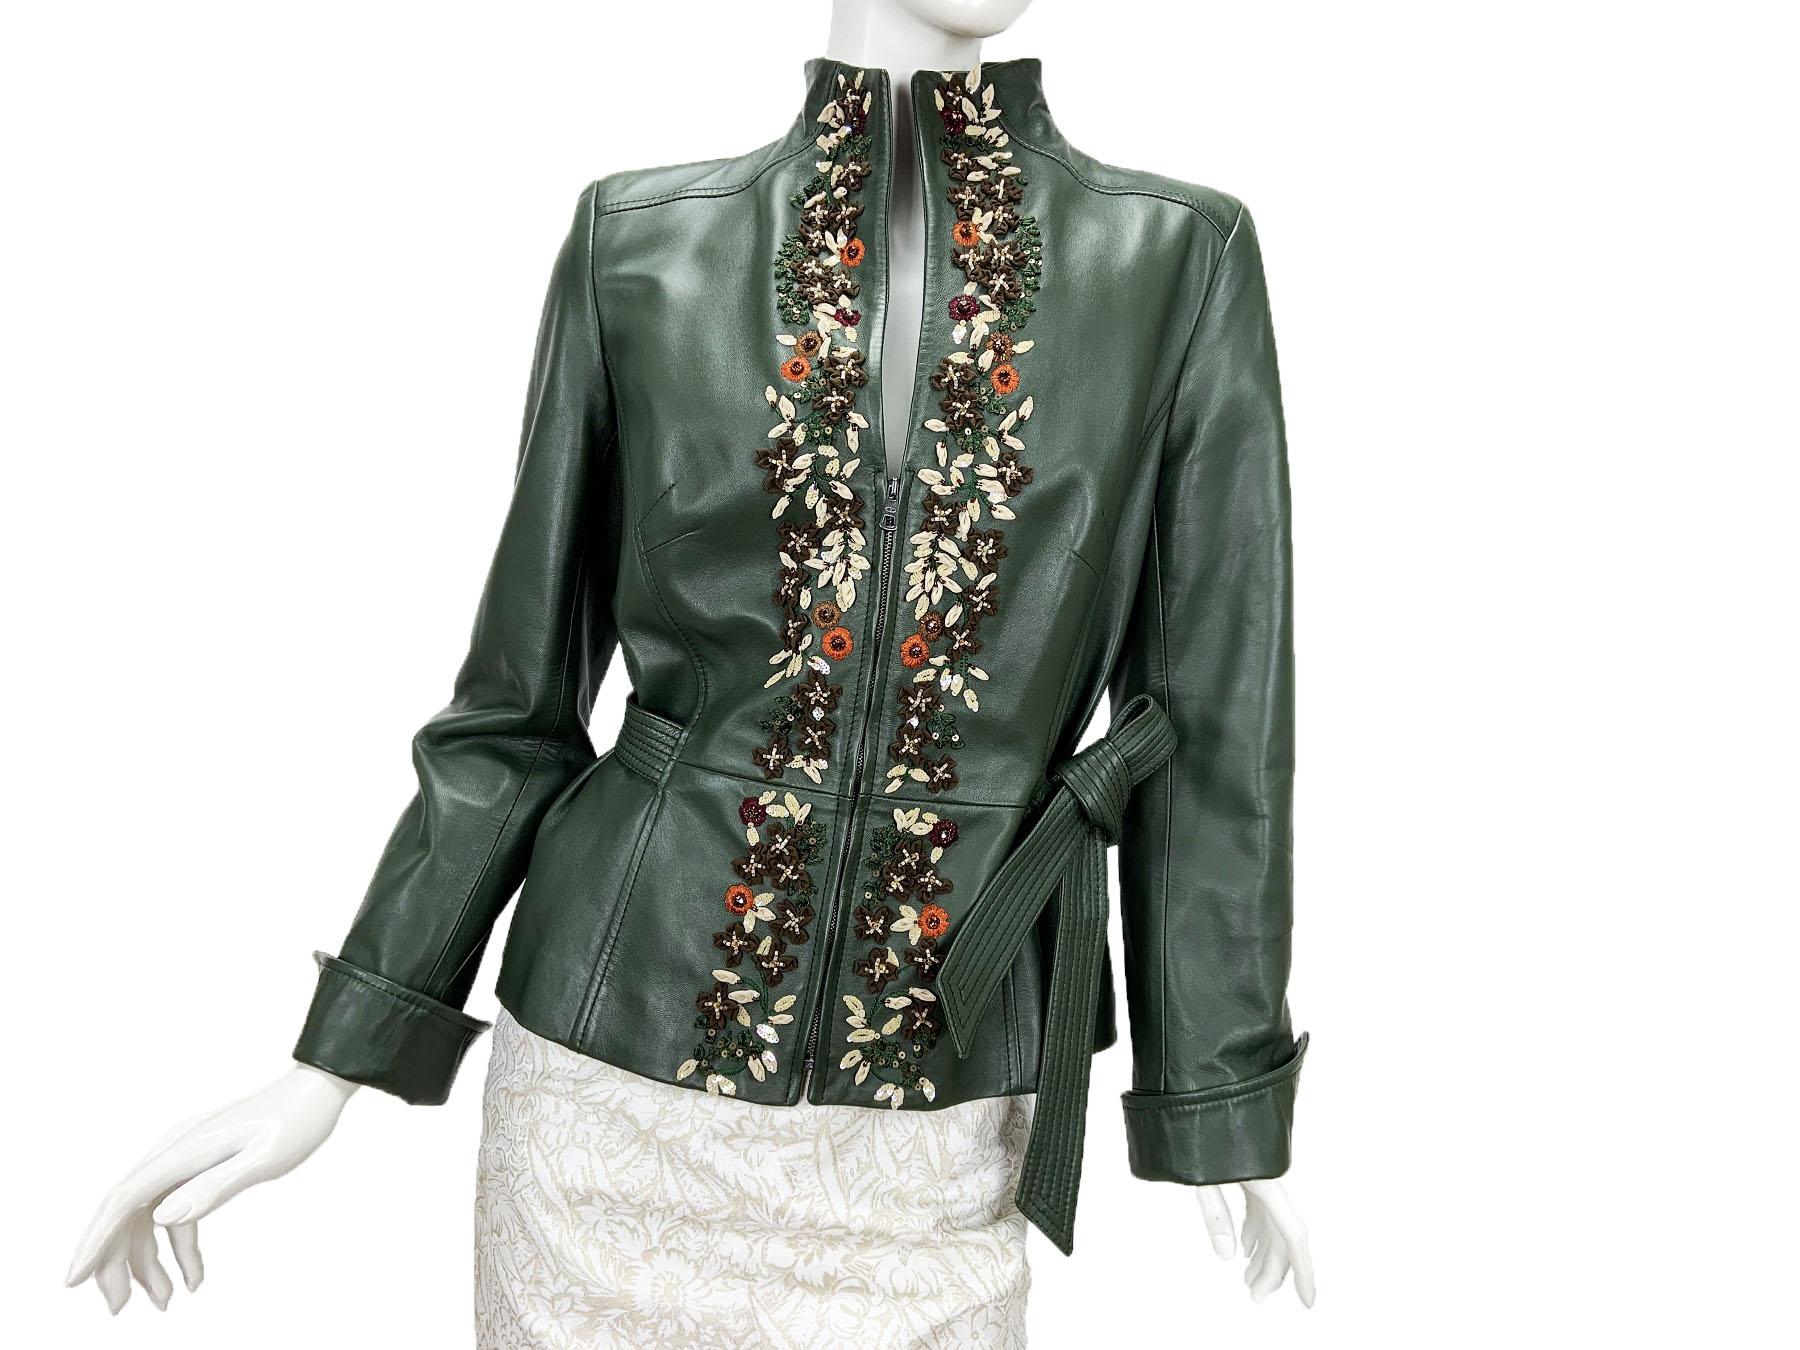 Valentino Vintage Embellished Green Leather Elegant and Feminine Fitted Jacket
Designer size - 10
Soft Green Lamb Leather,  3-D Flowers Application, Exclusively Embroidered and Beaded, Attached Belt, Fully Lined, Zip Closure, Double Back